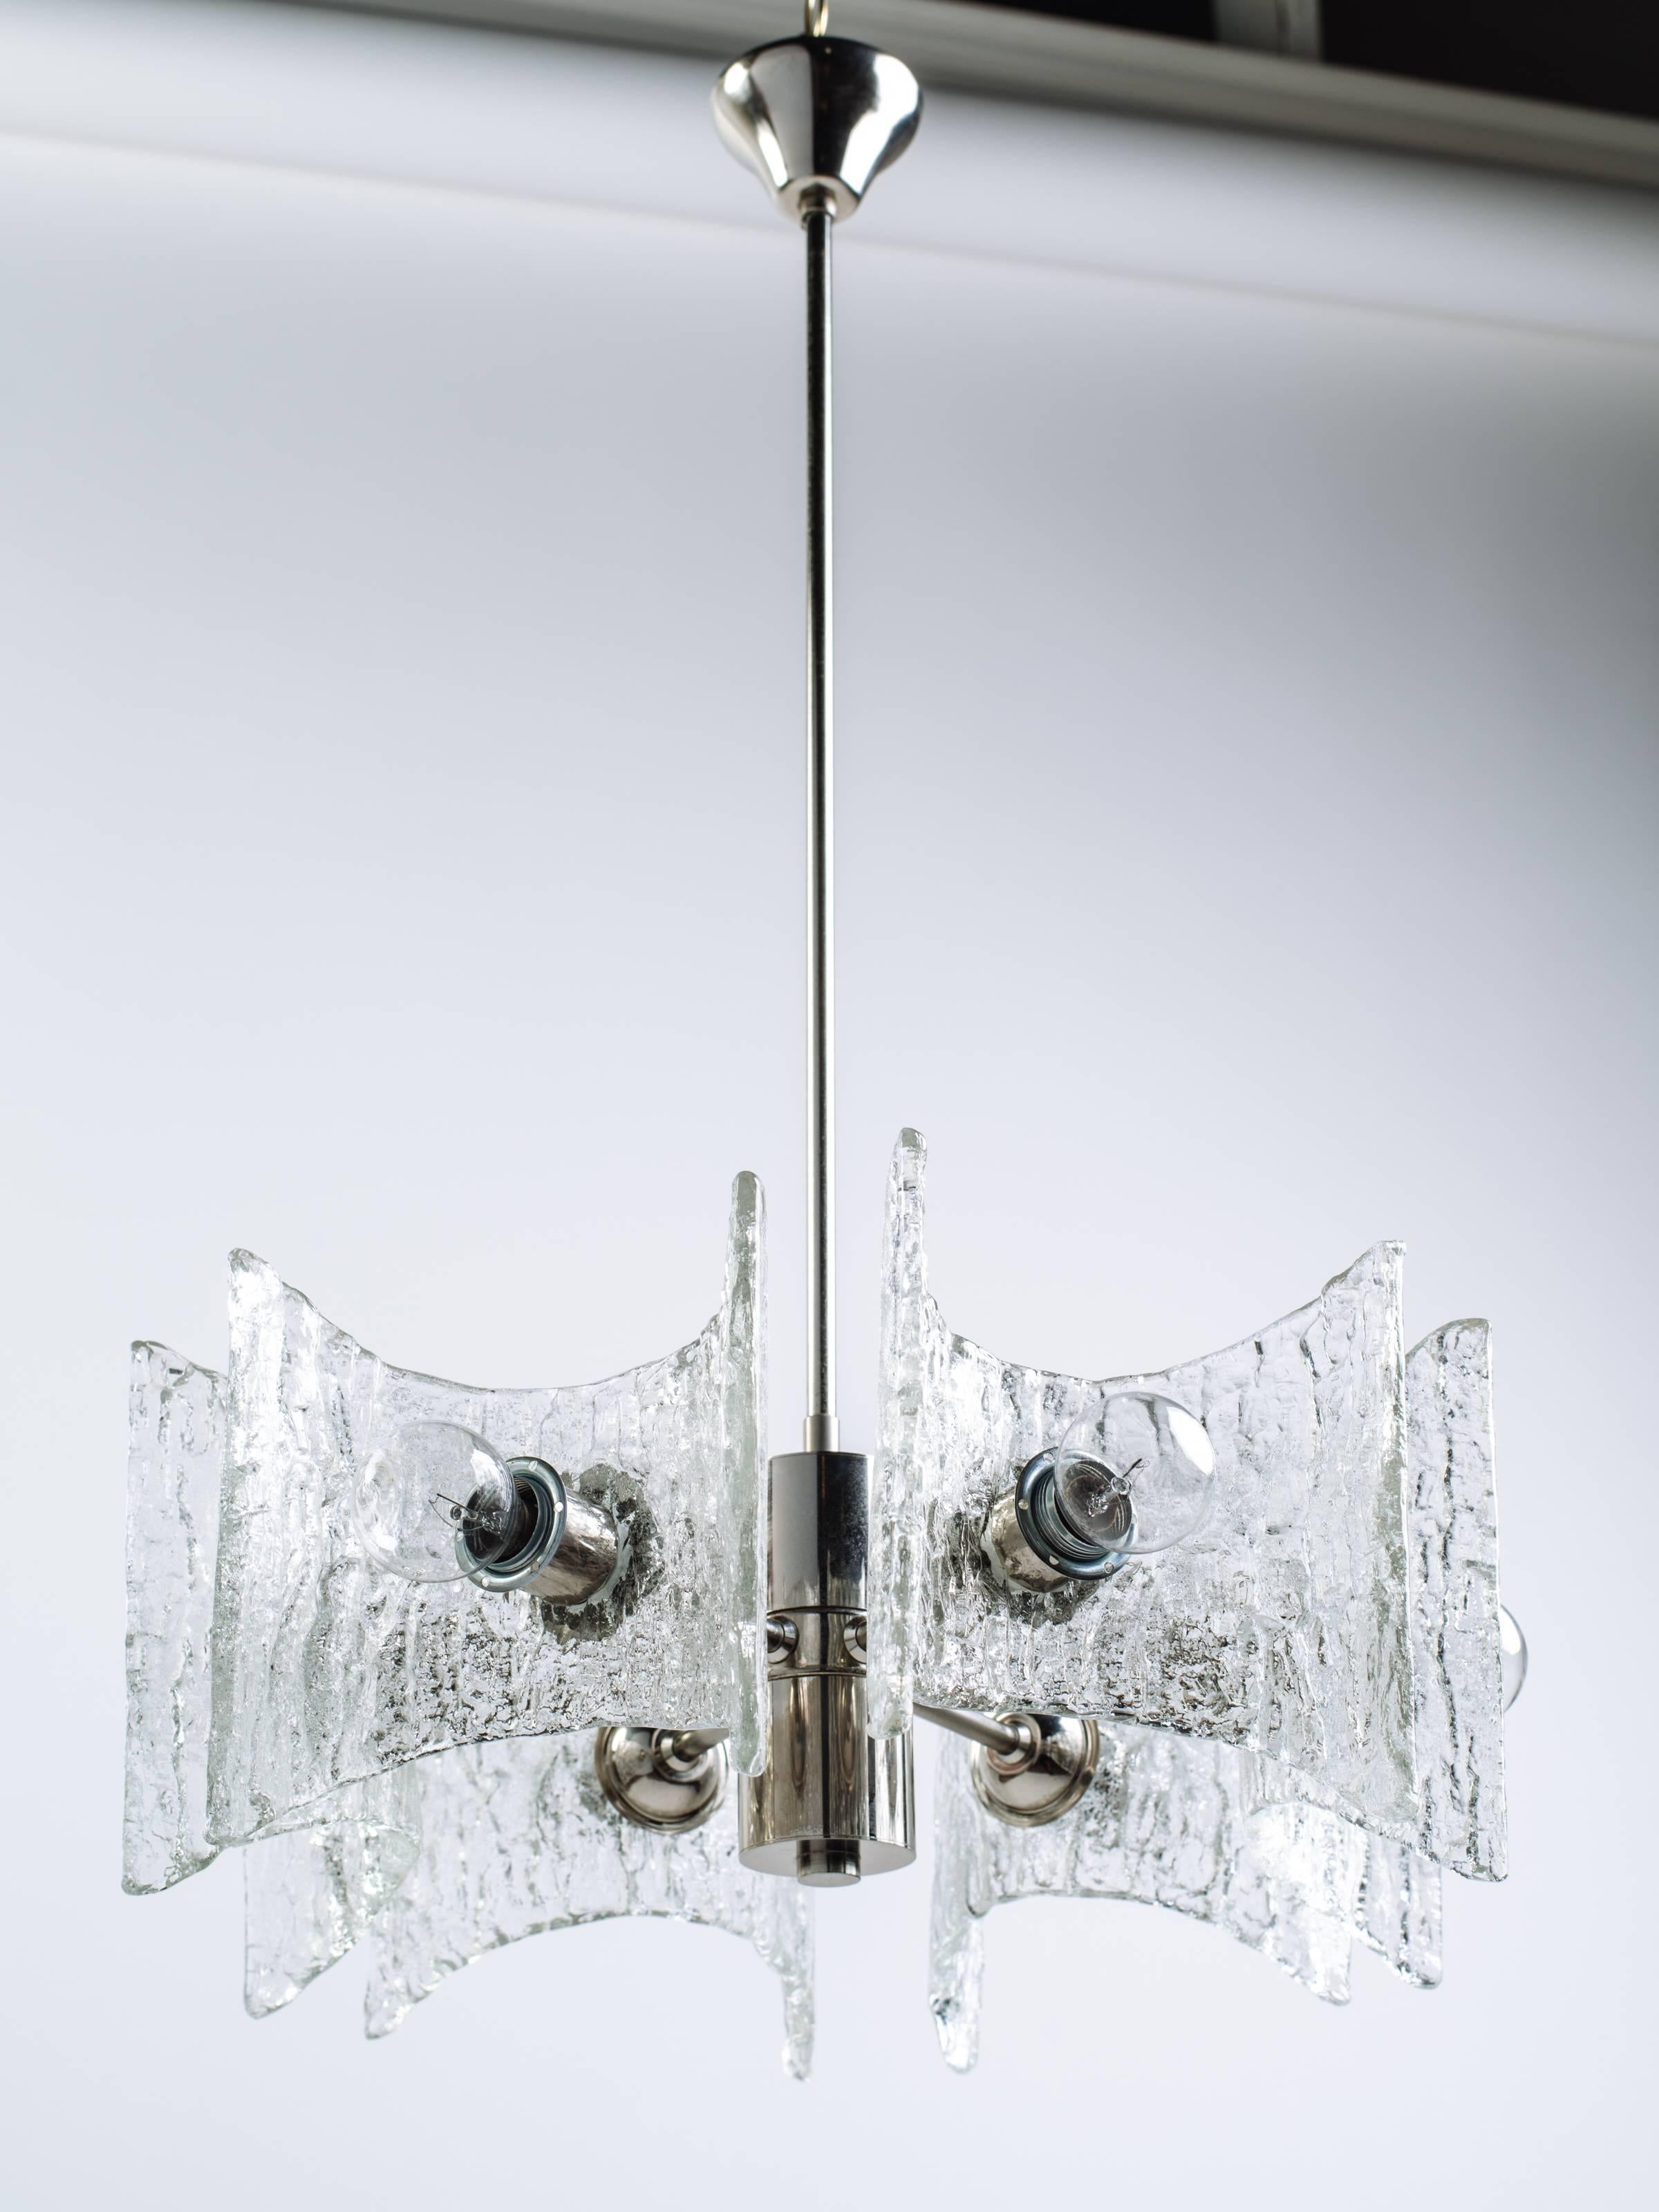 Modernist chrome chandelier with brilliant textured glass design. The chandelier is fitted with six lights and six hand blown shades with curved design and stylized pointed corners.